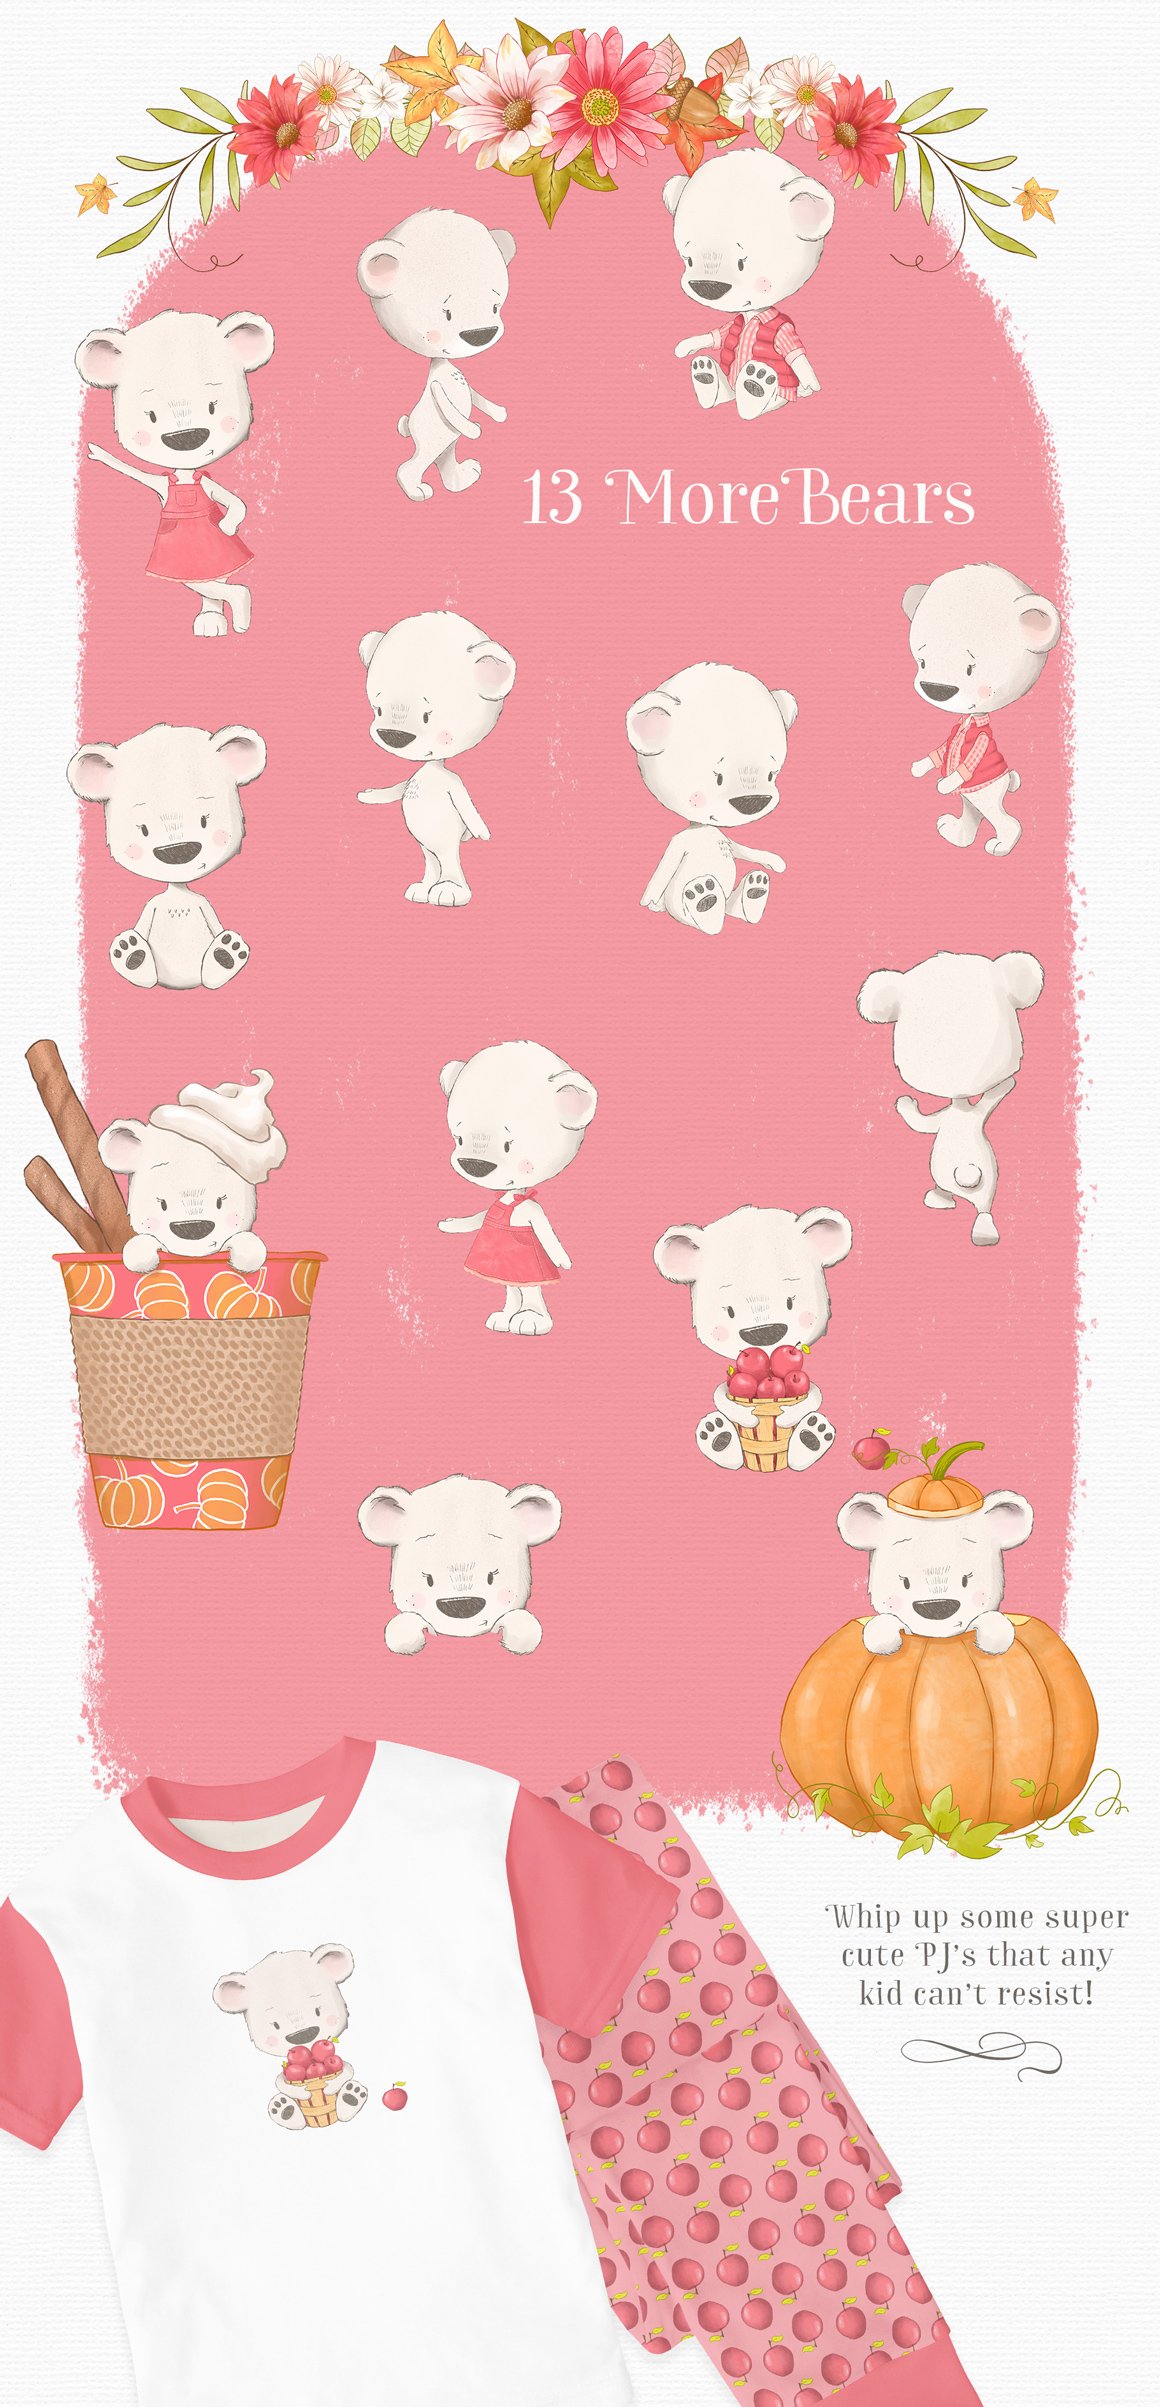 Happy Fall Y'all Animal Clipart Kit